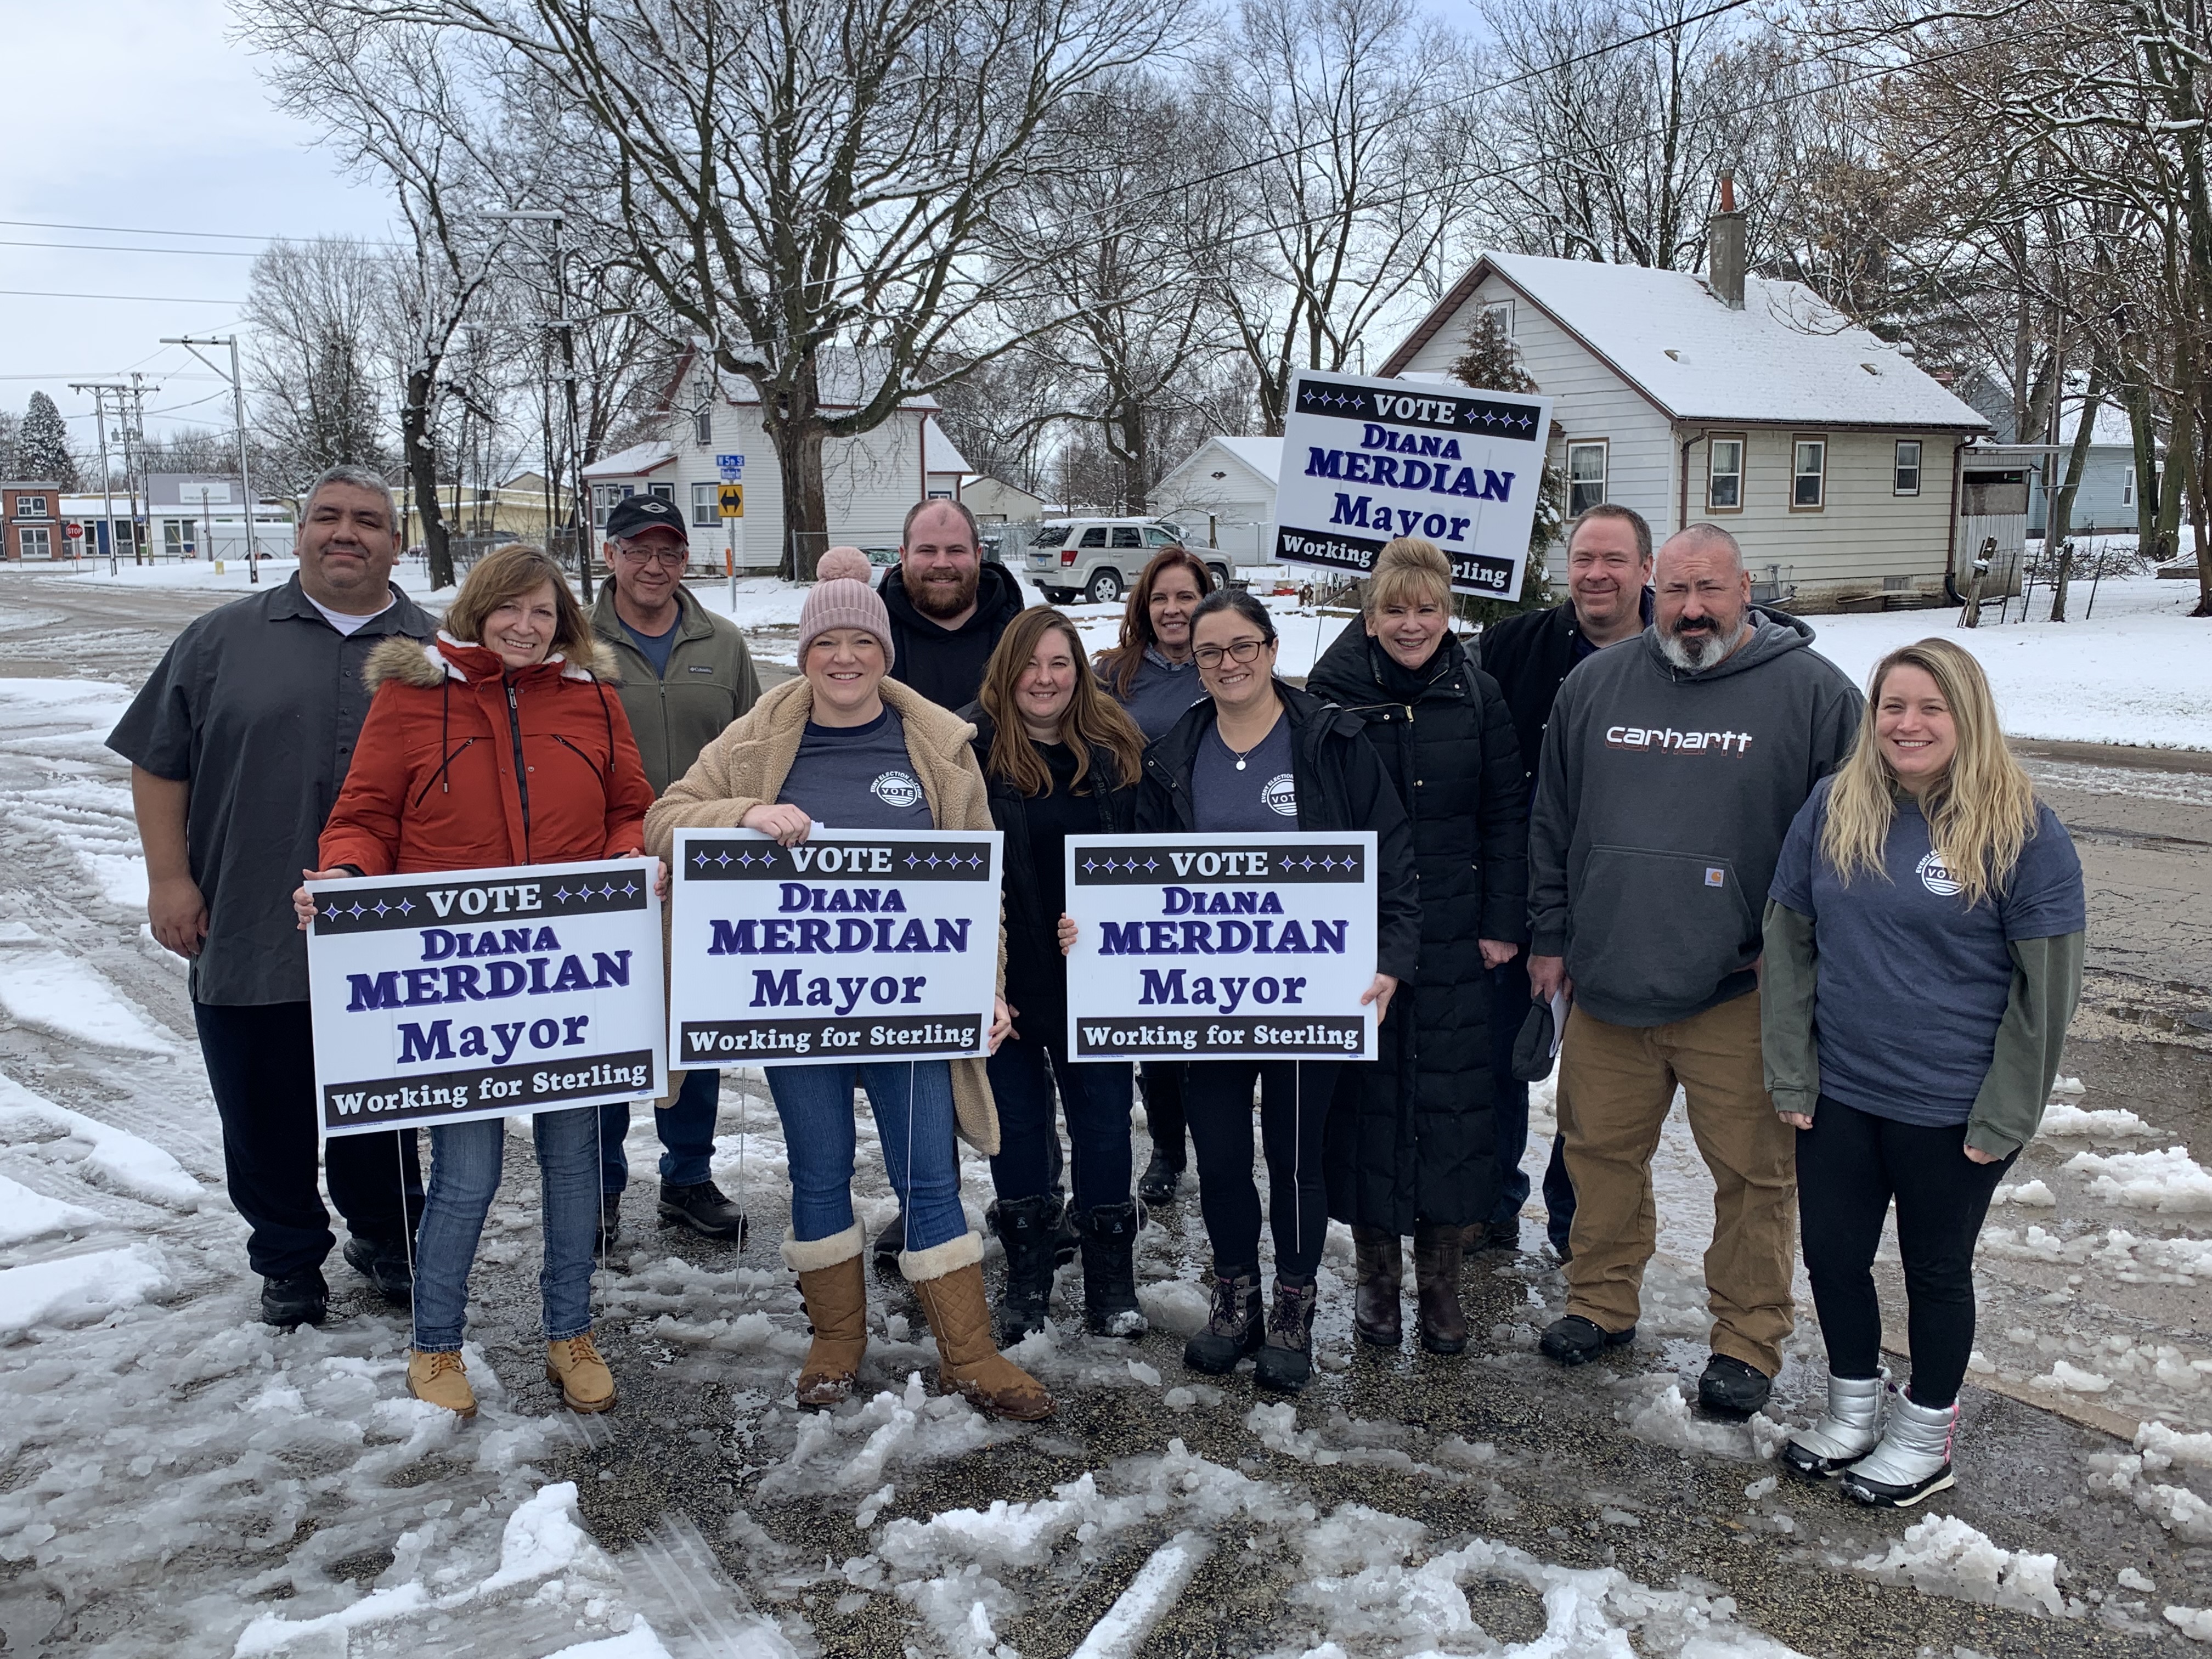 CGH workers, AFSCME members and community supporters didn't let the snow stop them from spreading the word about Diana Merdian, AFSCME's endorsed candidate for Mayor of Sterling